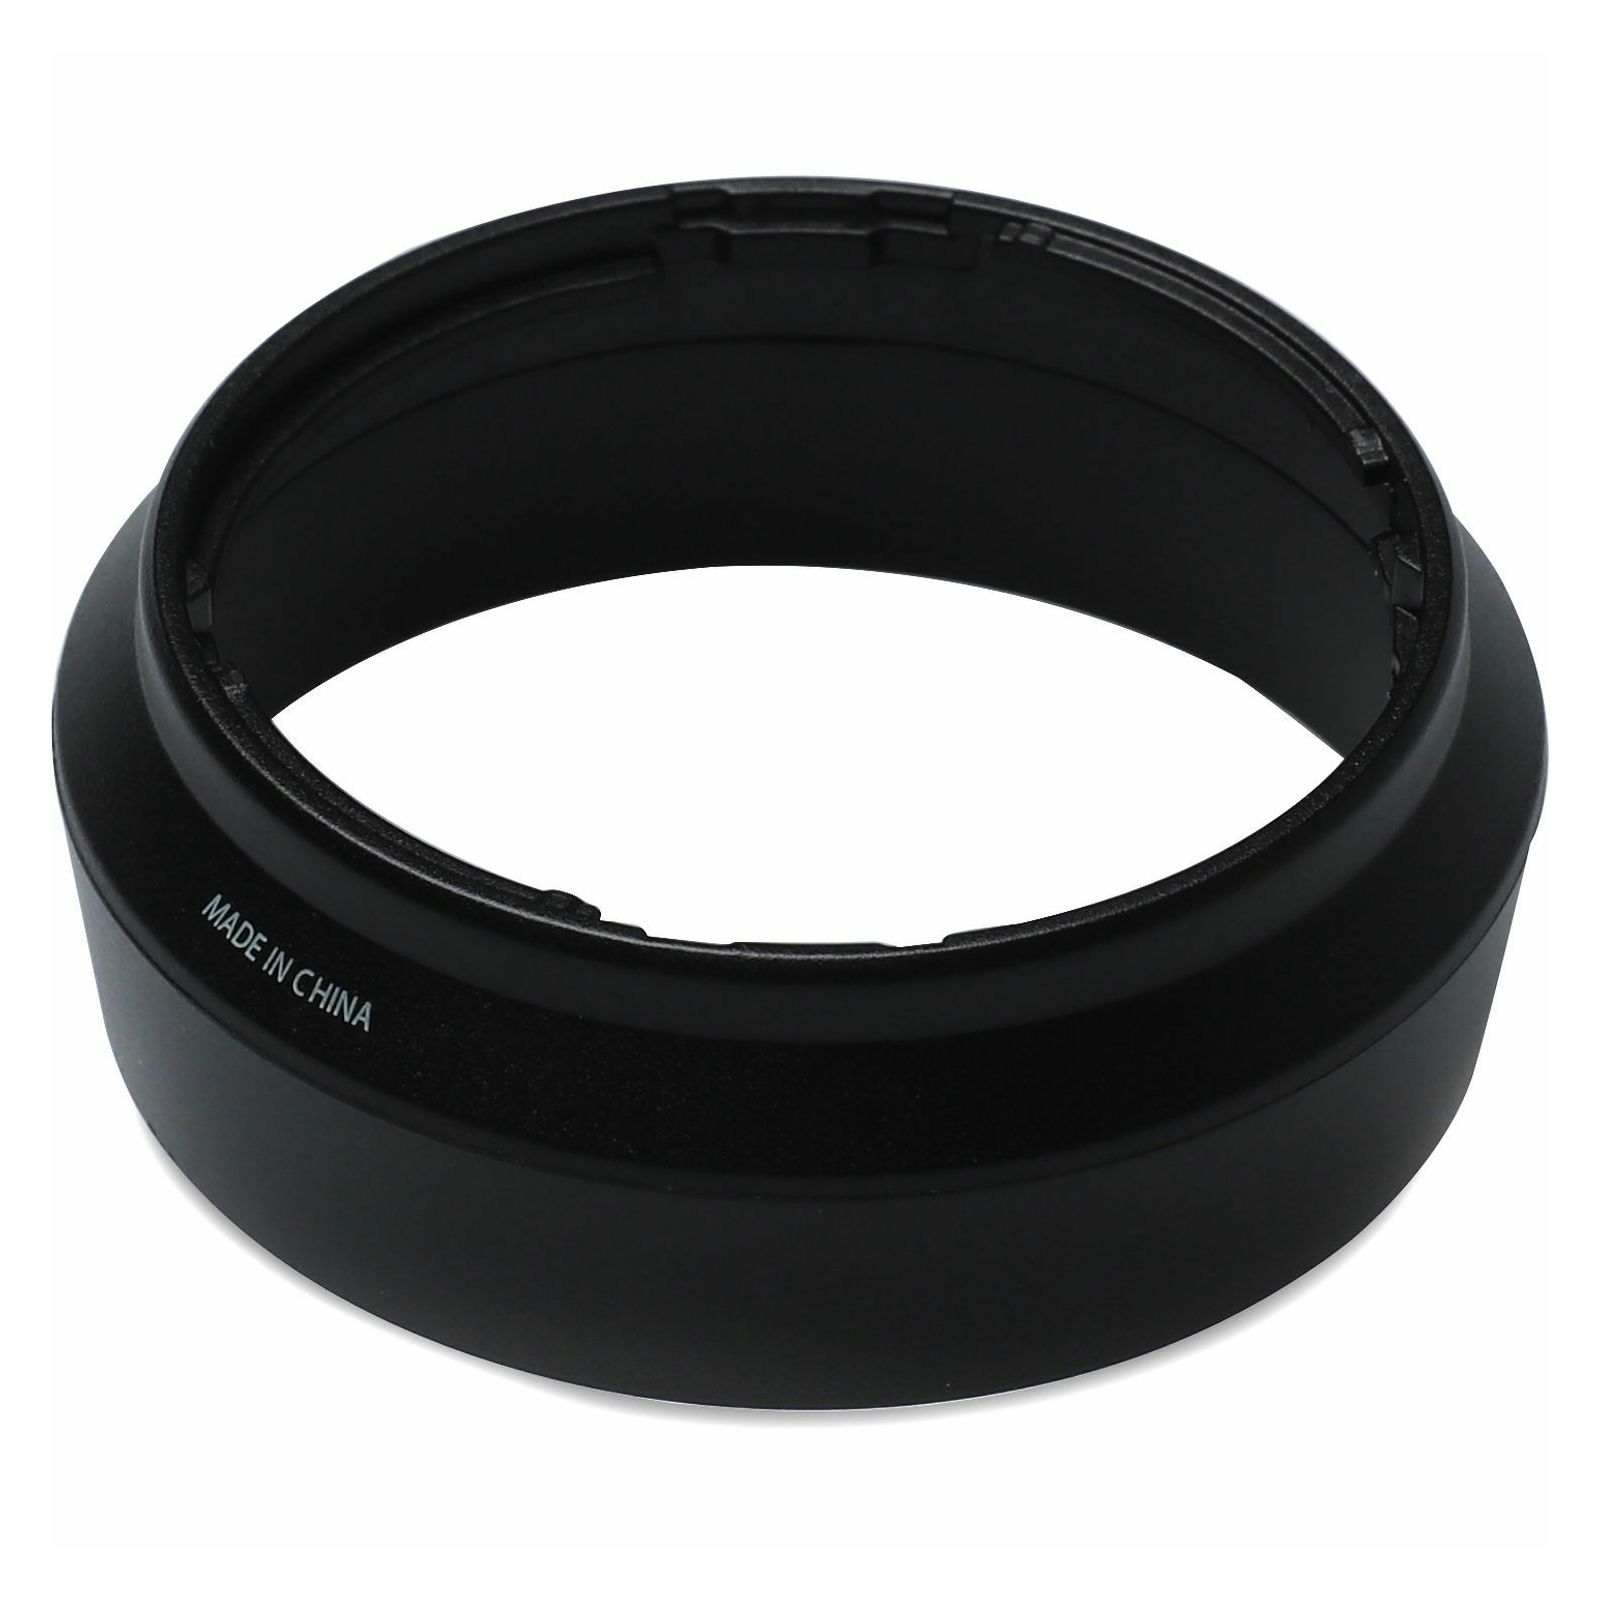 DJI Zenmuse X5S Spare Part 02 Balancing Ring for Panasonic 15mm F/1.7 ASPH Prime Lens